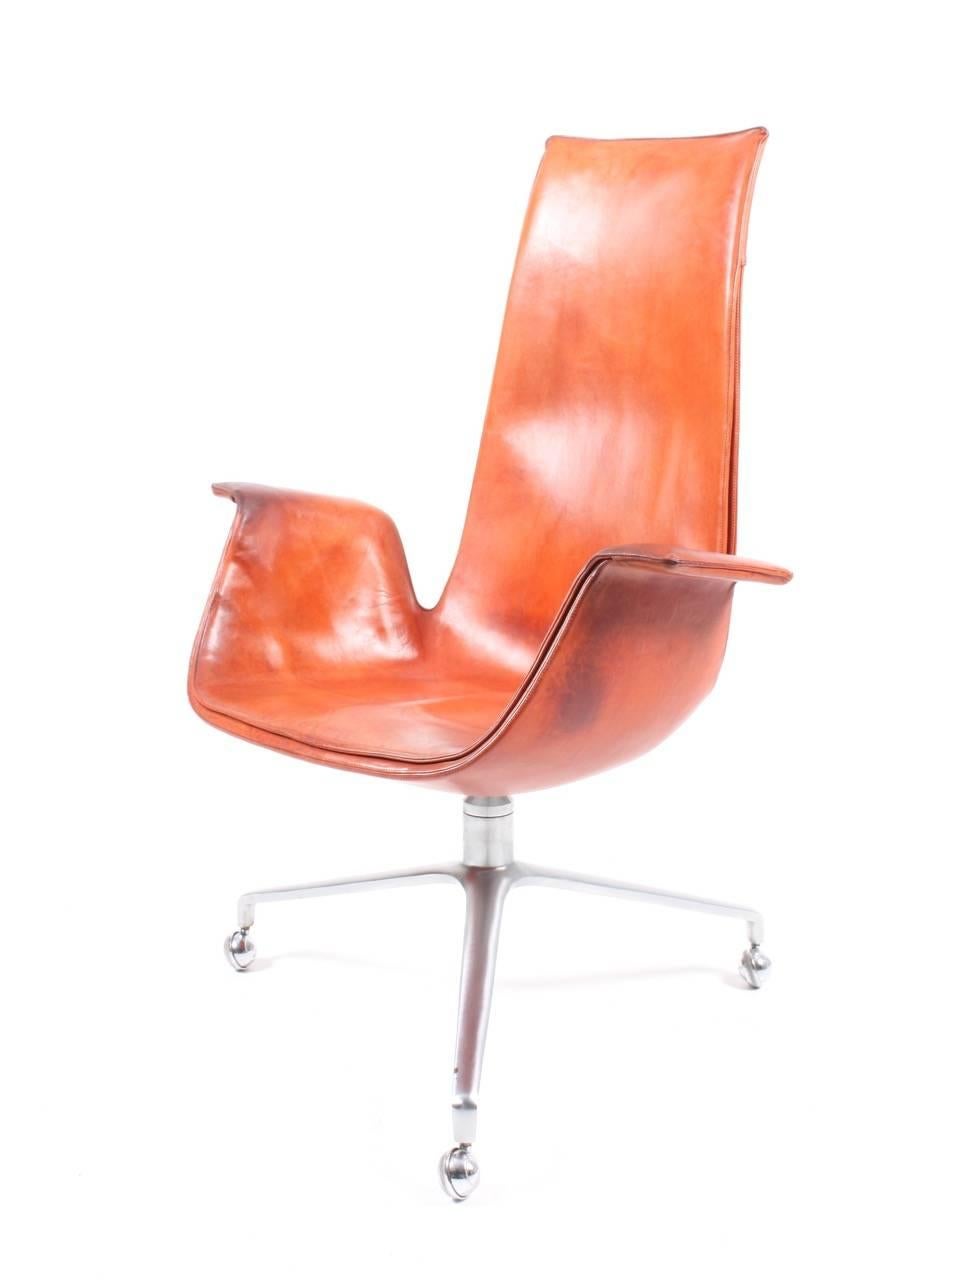 Mid-20th Century Tulip Chair by Fabricius & Kastholm